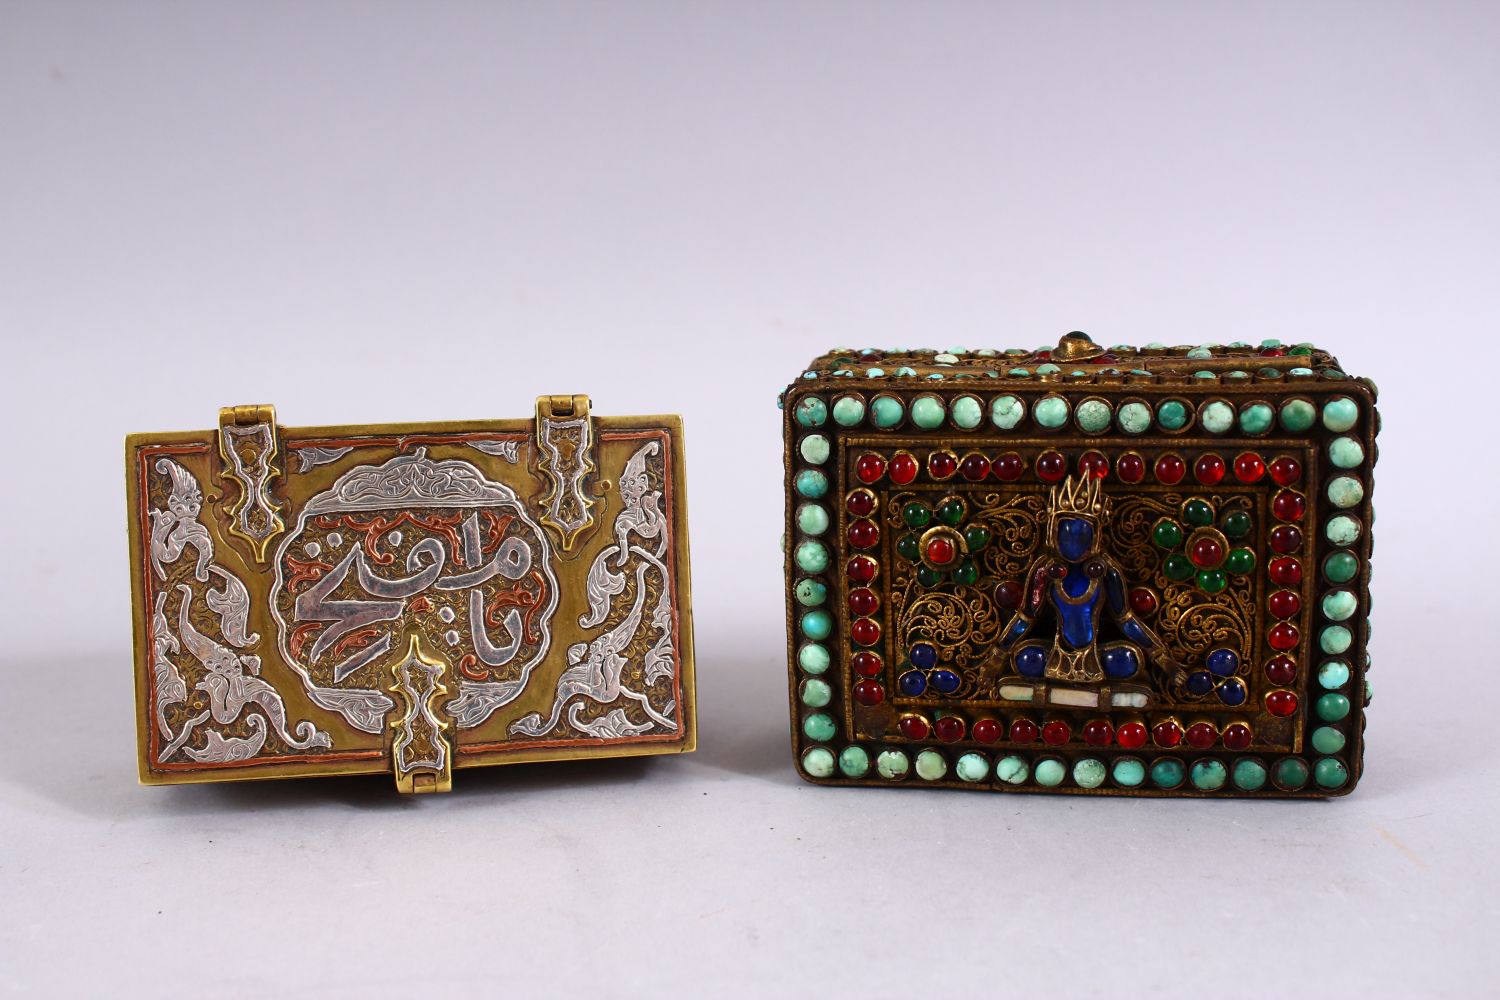 TWO GOOD ISLAMIC / INDIAN LIDDED MIXED METAL CALLIGRAPHIC BOXES, One with silver inlays of - Image 5 of 7